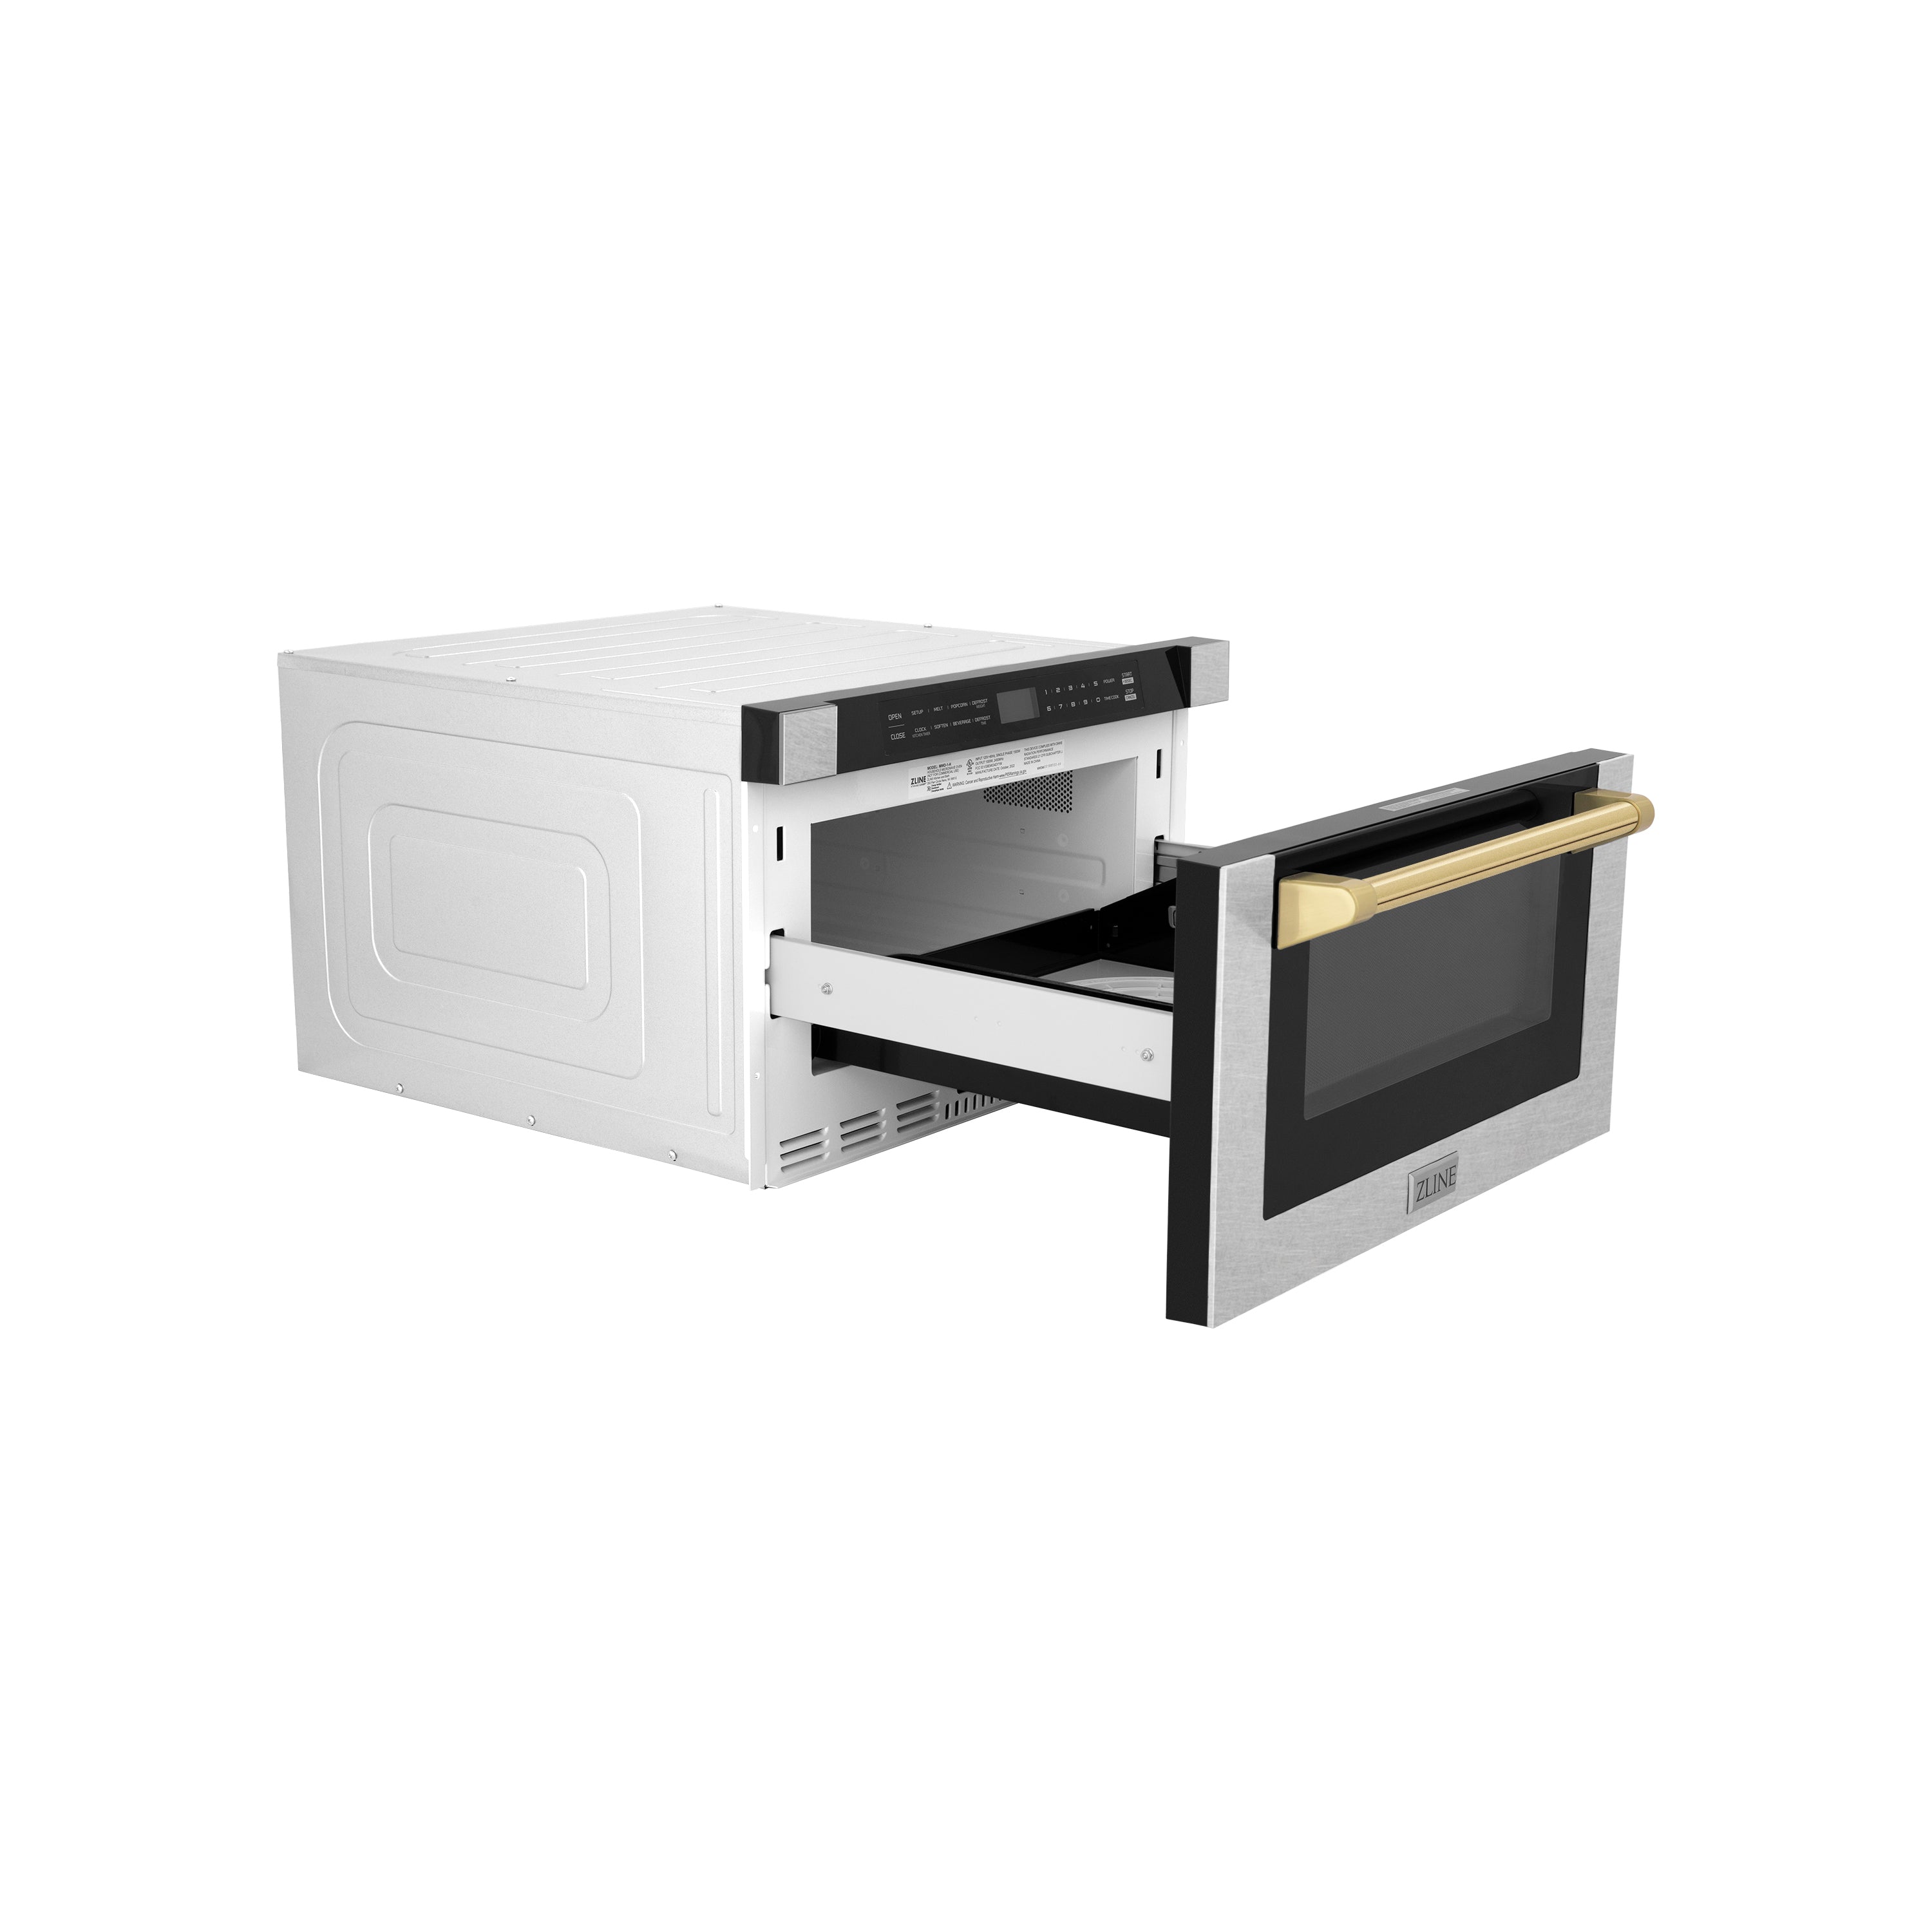 ZLINE Autograph Edition 24" 1.2 cu. ft. Built-in Microwave Drawer with a Traditional Handle in Fingerprint Resistant Stainless Steel and Polished Gold Accents